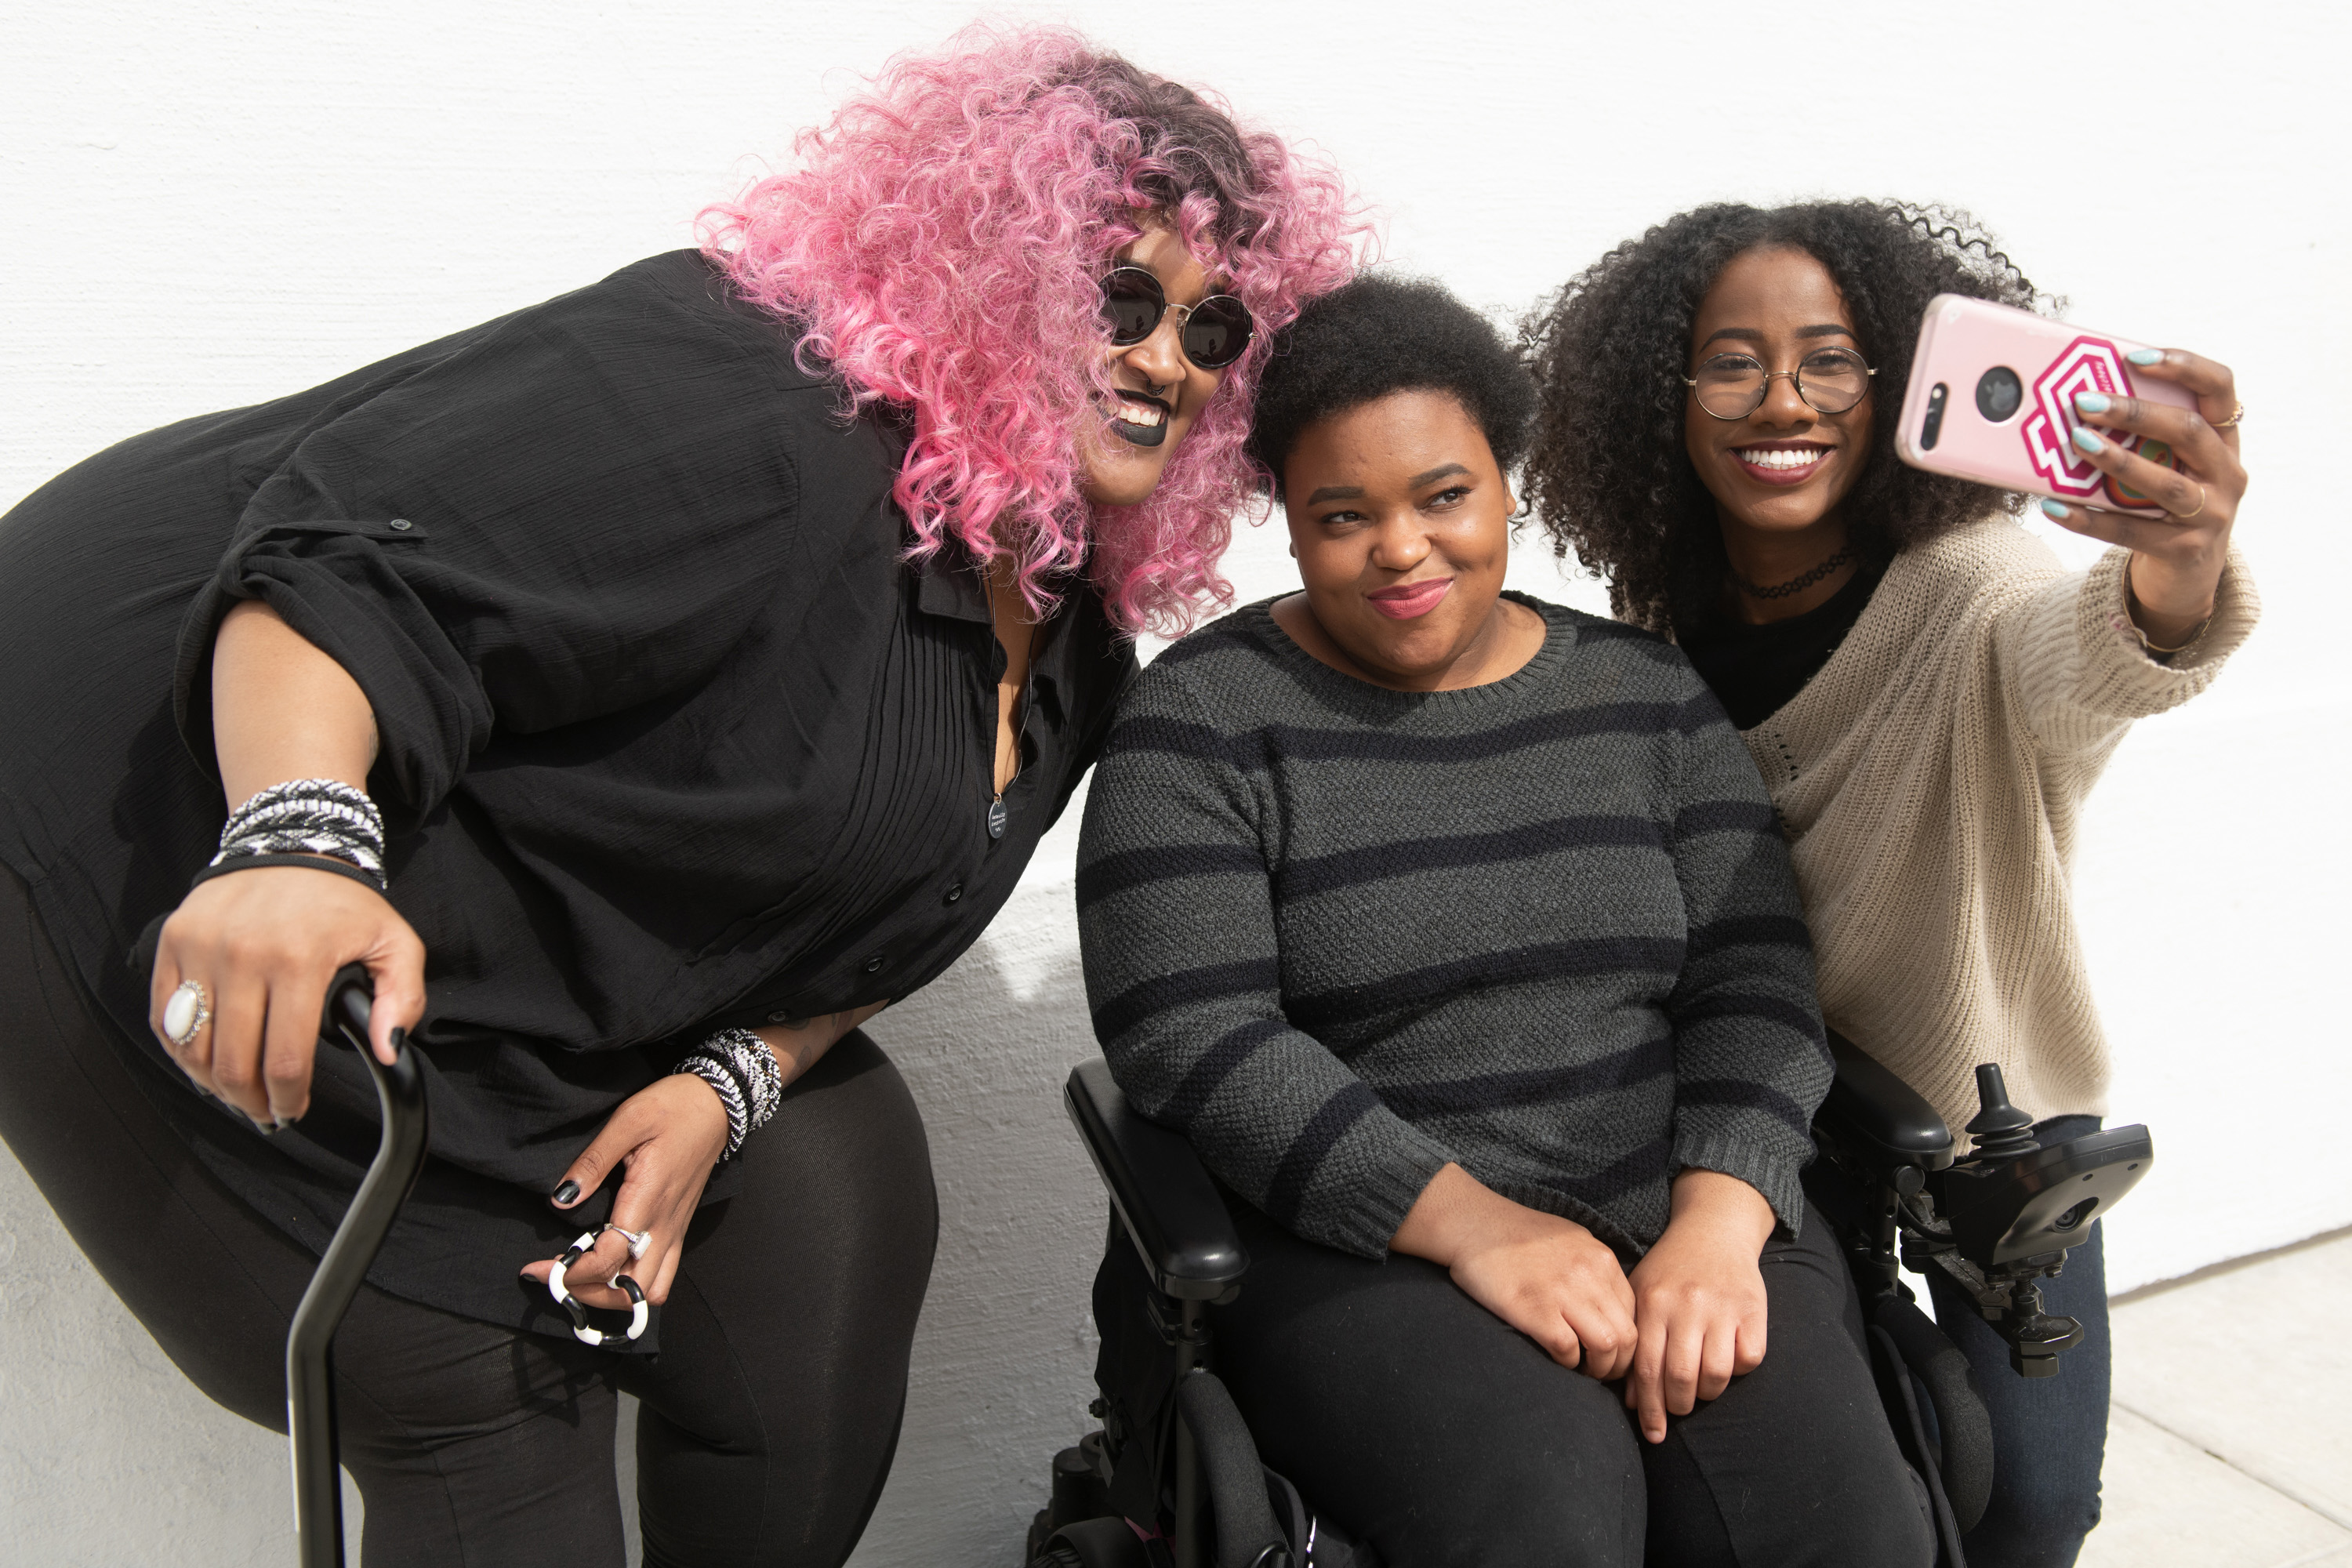 A tight crop of three Black and disabled friends (a non-binary person with a cane and tangle stim toy, a non-binary person sitting in a power wheelchair, and an invisibly disabled femme) smiling and taking a cell phone selfie together.